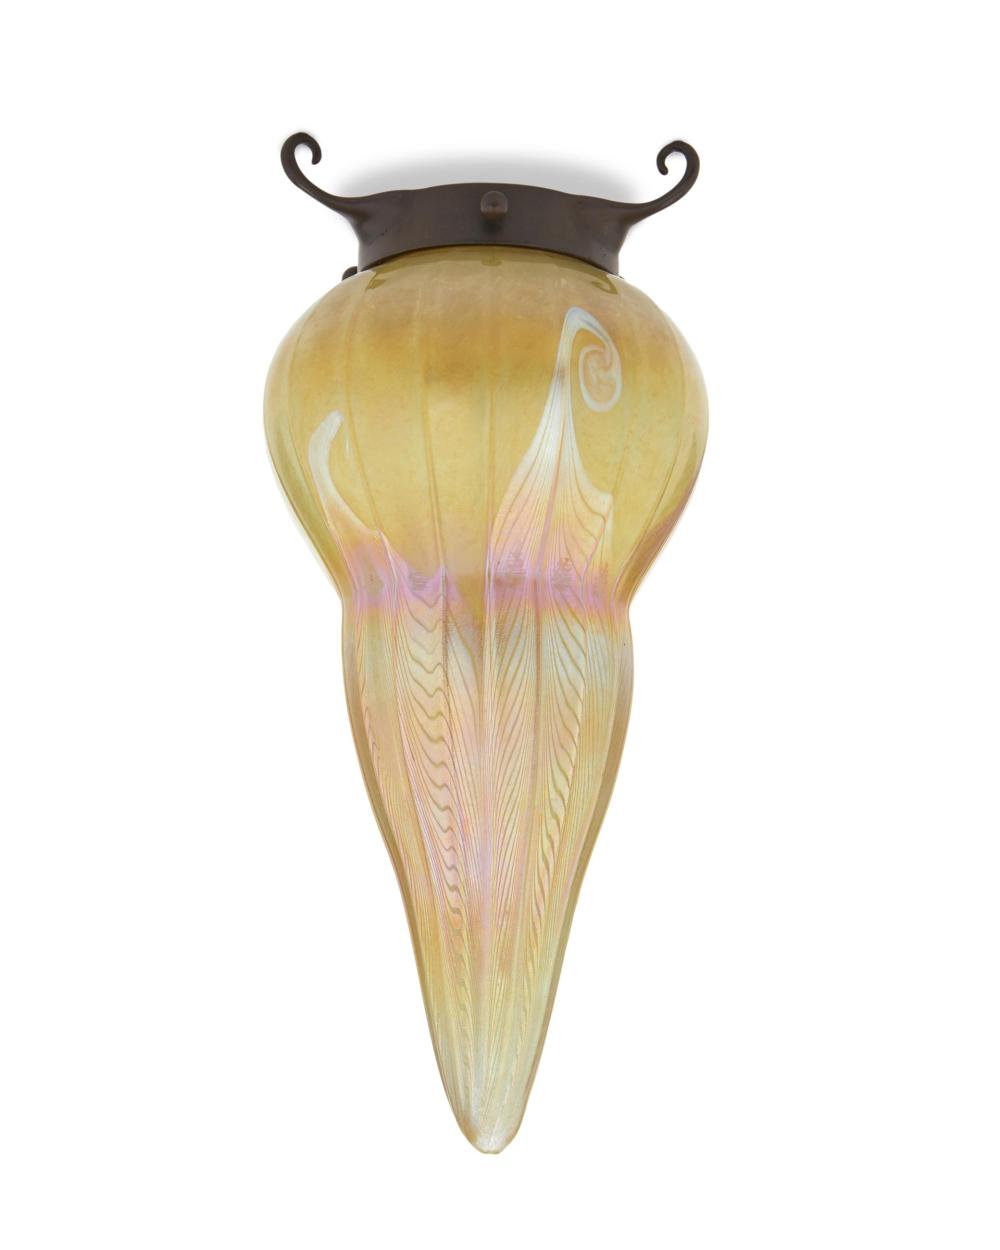 A TIFFANY-STYLE GLASS HANGING PENDANT